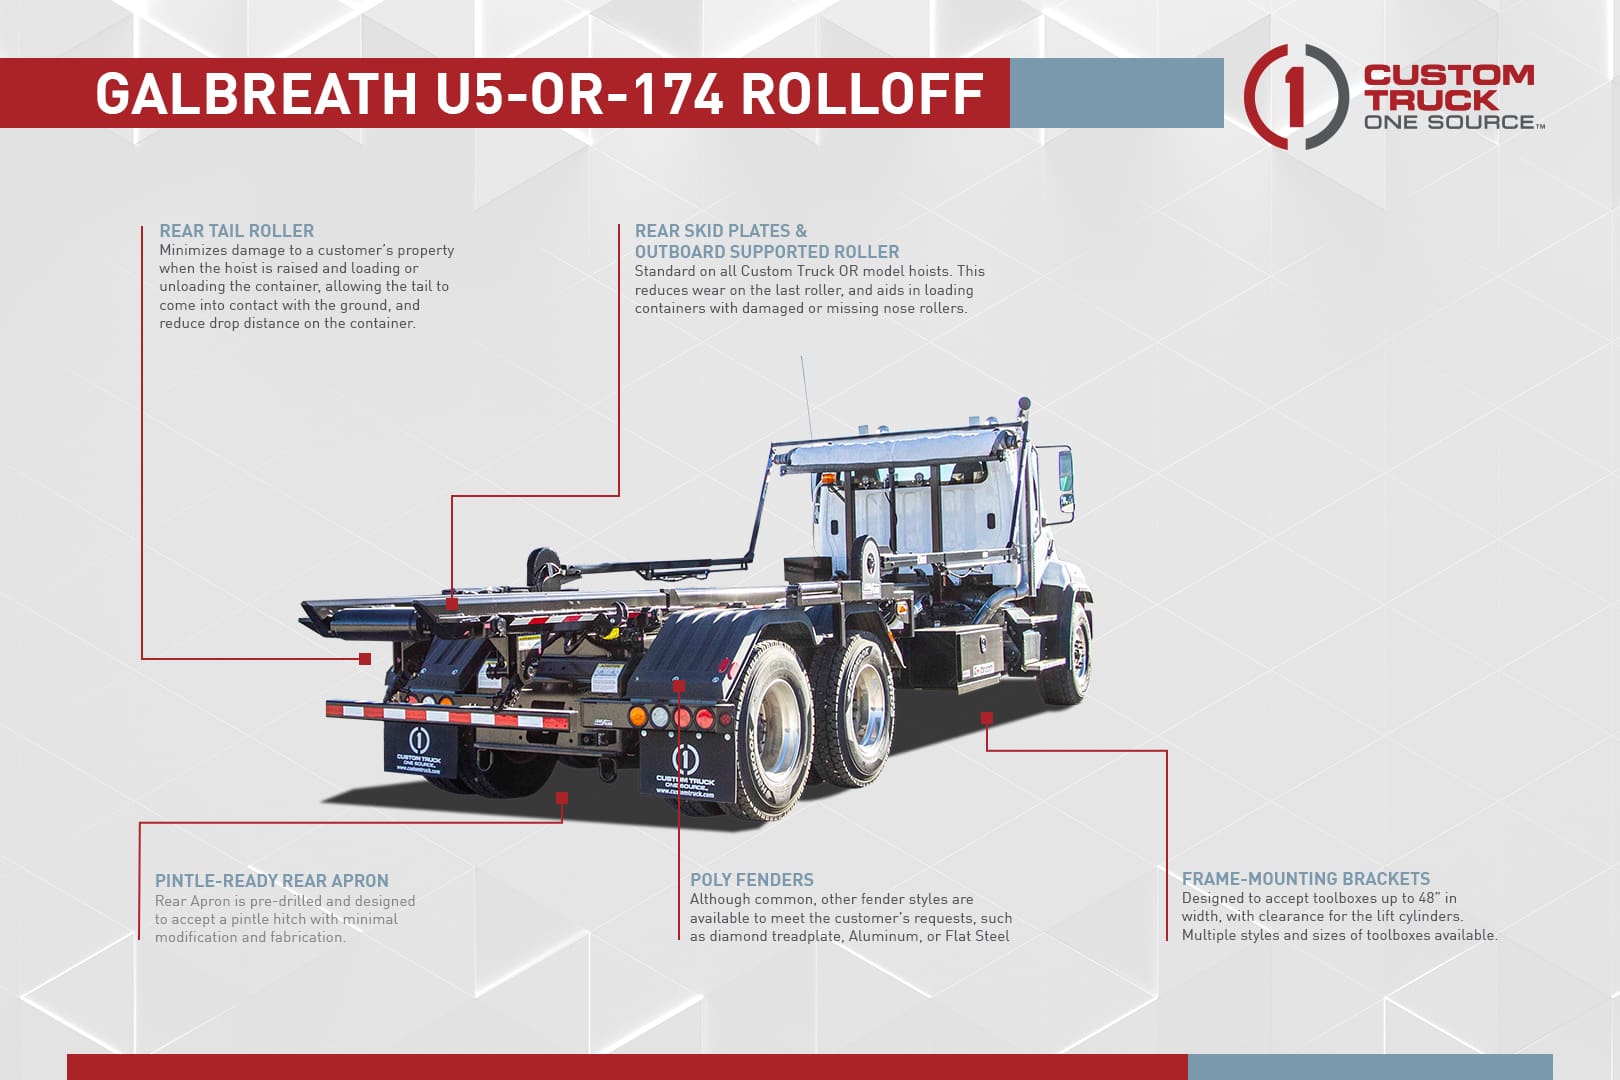 Galbreath Roll-Off Infographic